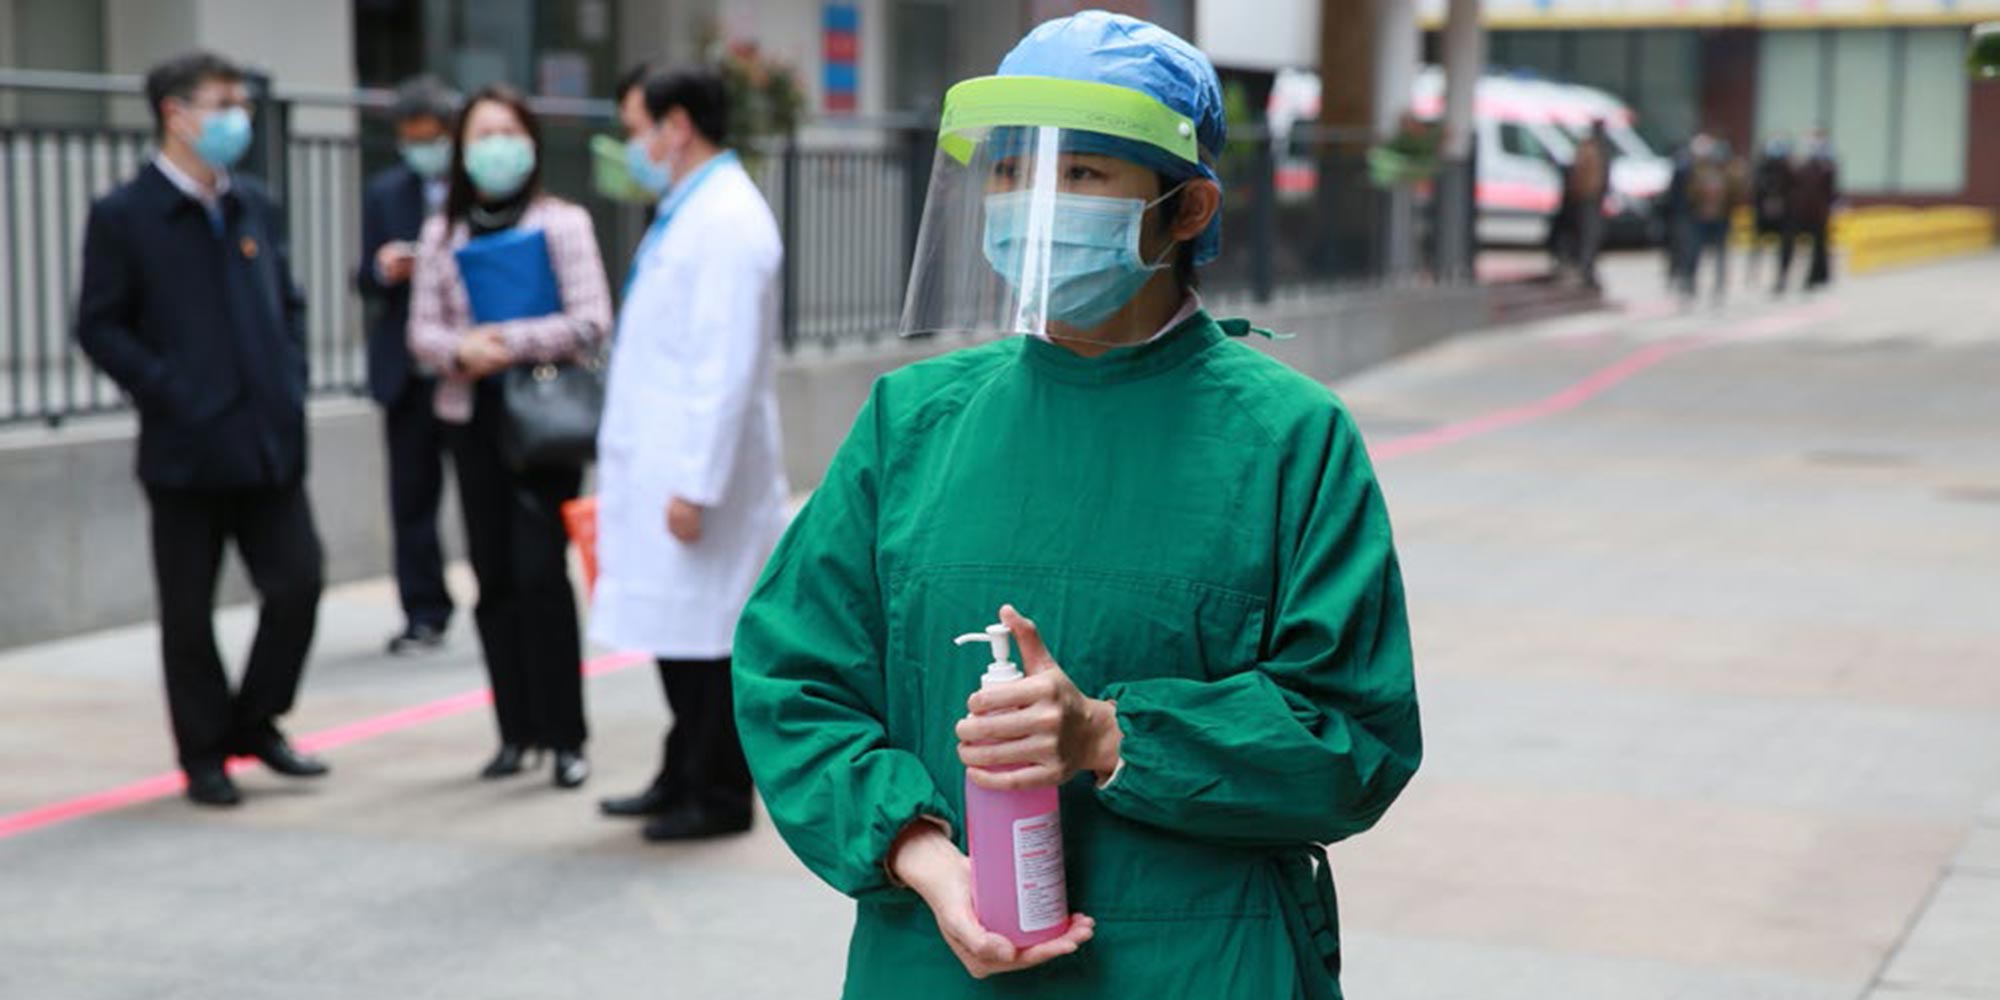 A woman dispenses hand sanitizer at the Guangzhou Women and Children's Health Medical Center in Guangzhou, Guangdong Province. WHO/2020